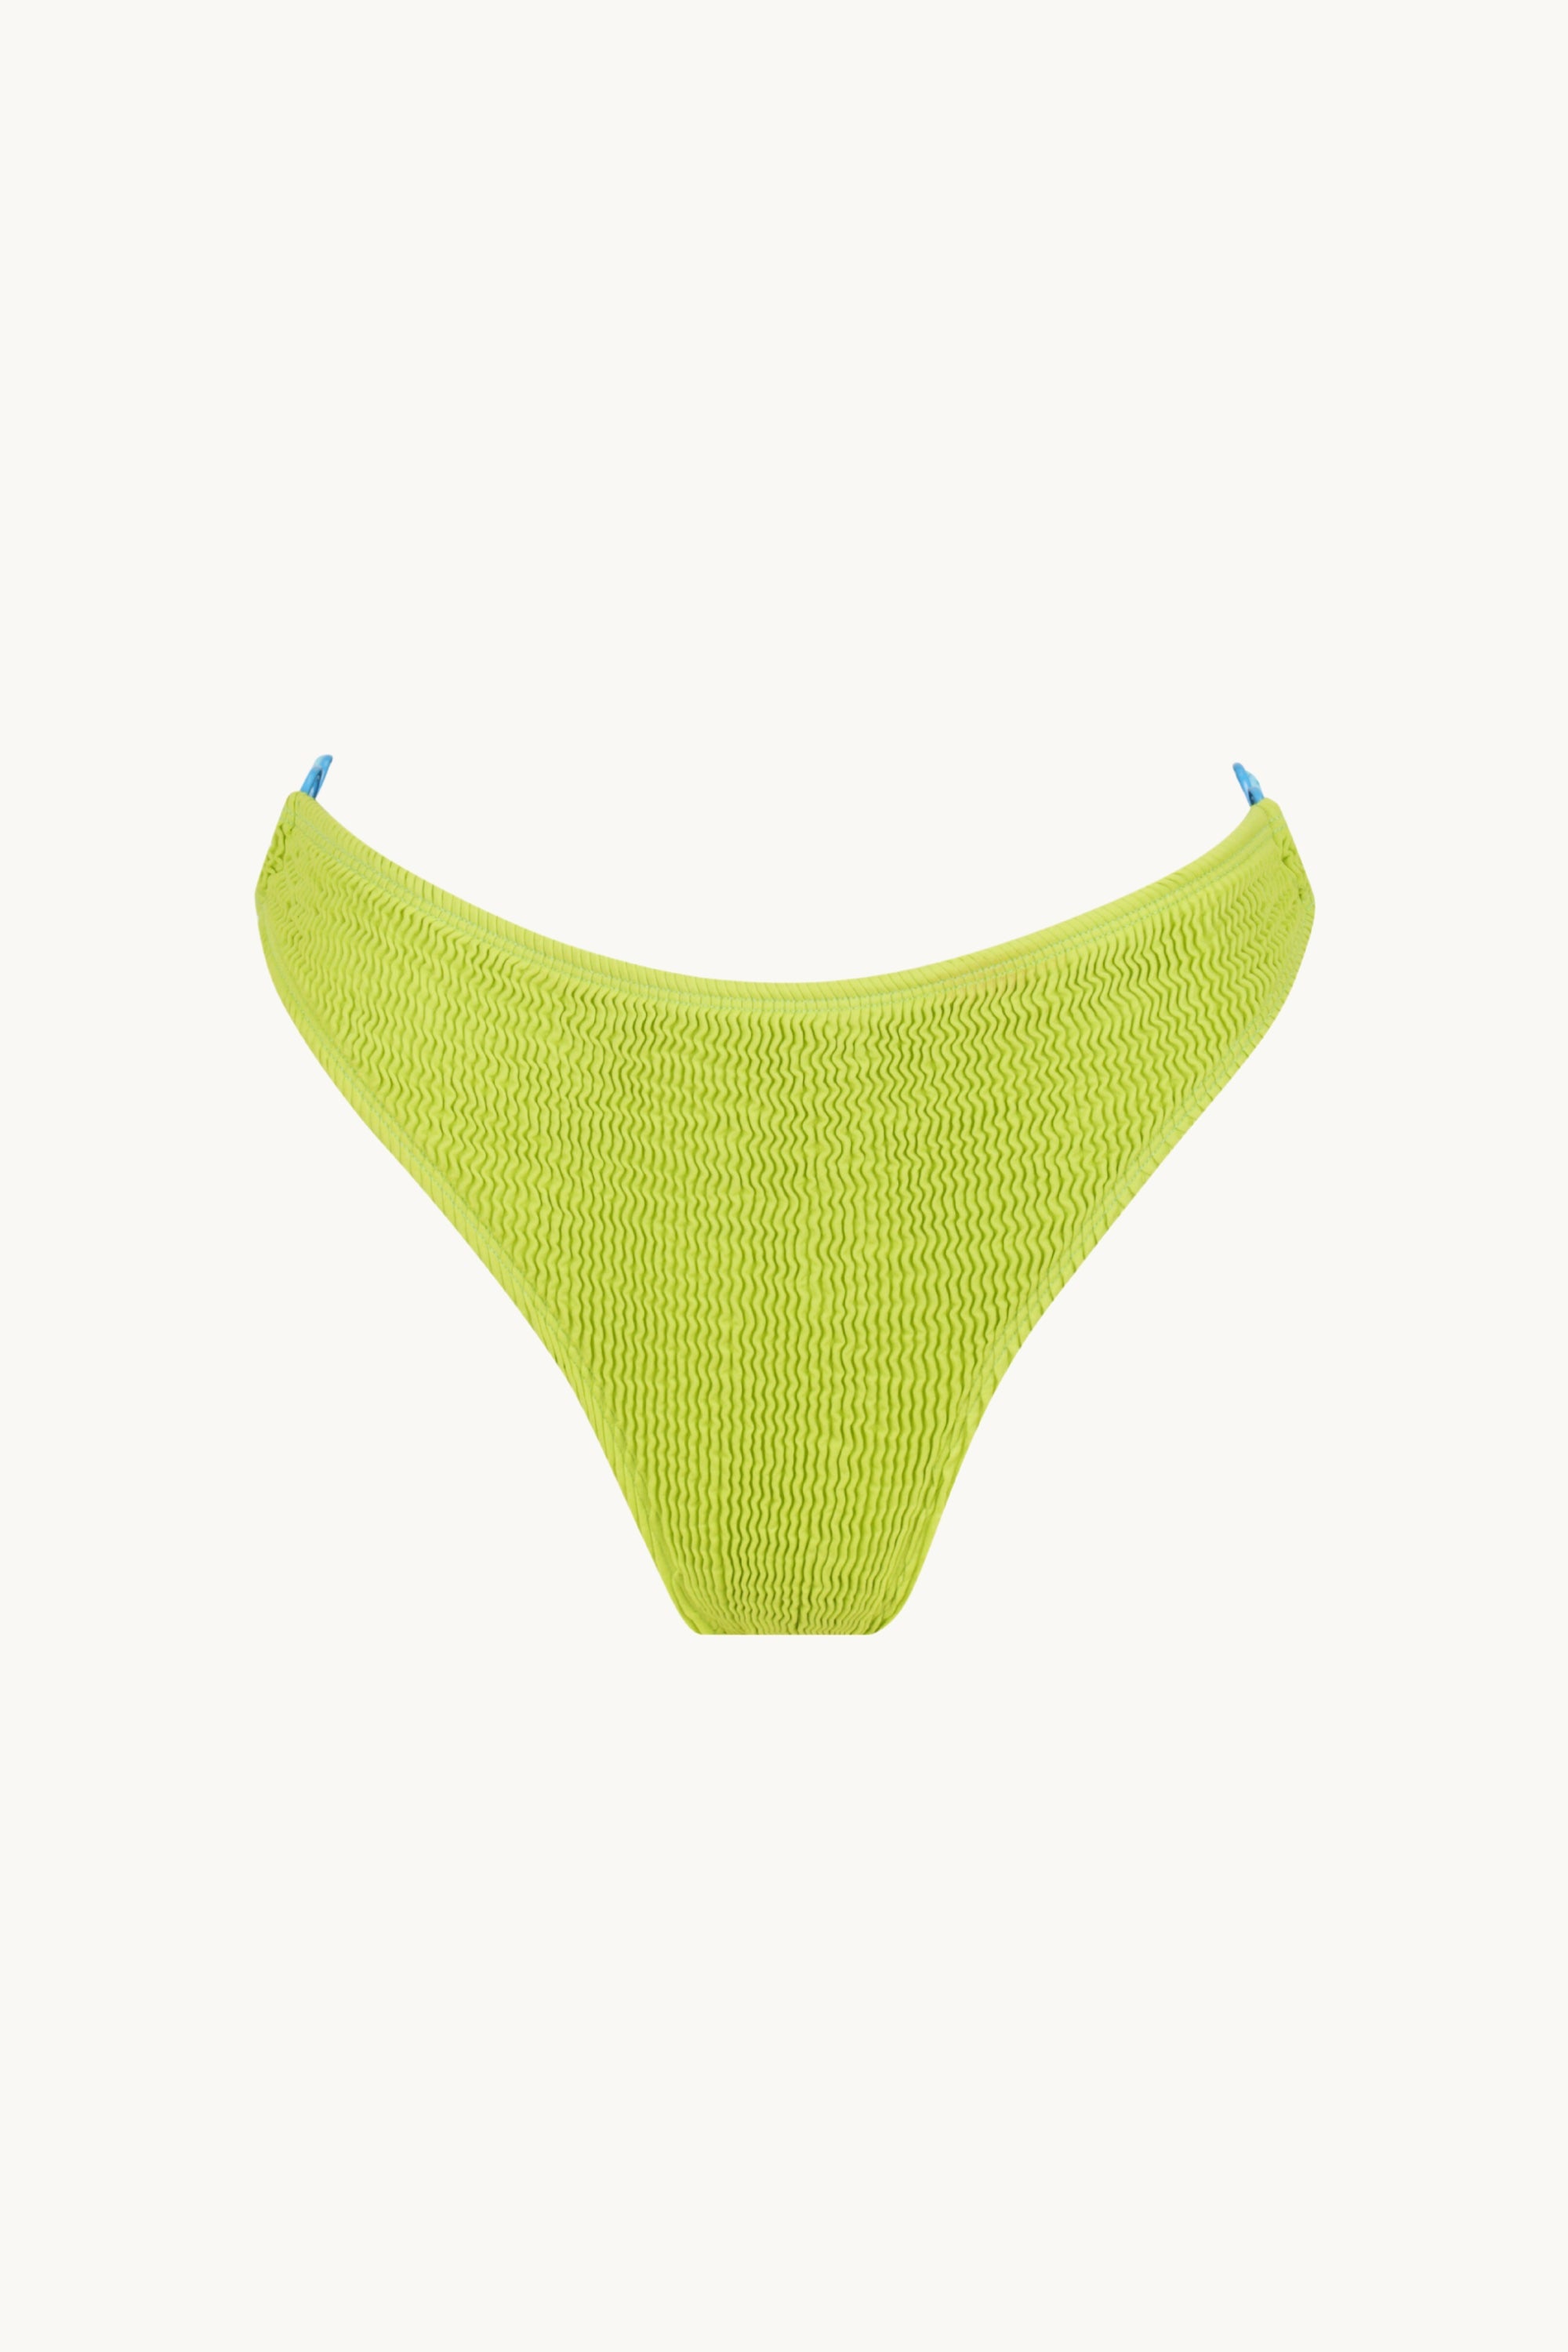 BOOMERANG BRIEF CHARTREUSE AND SKY